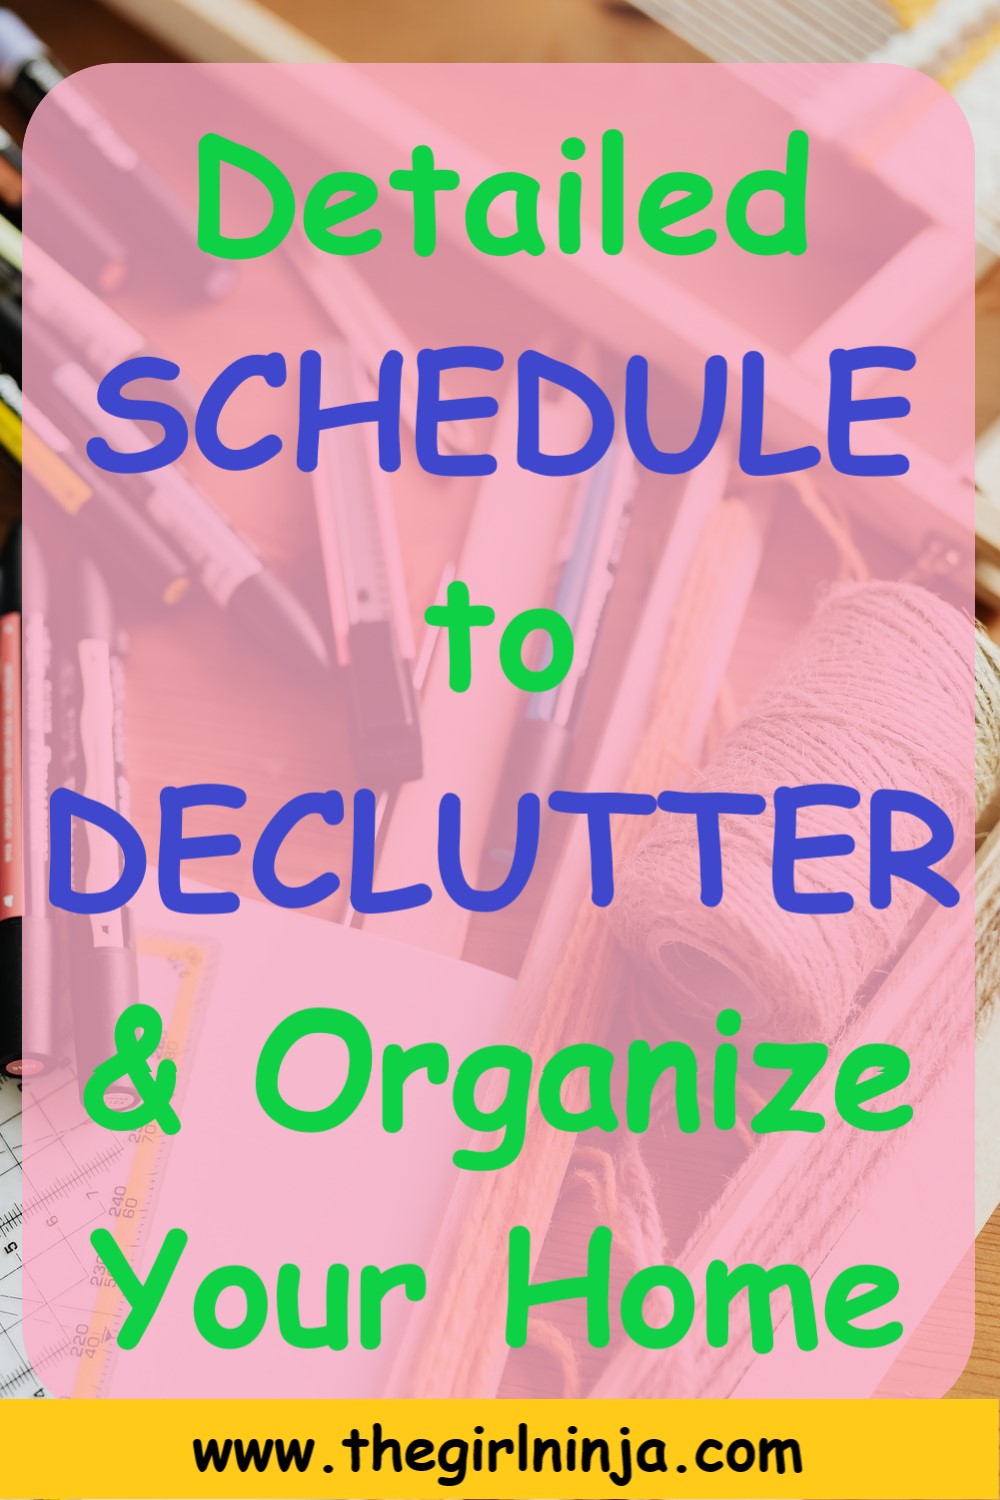 An open wooden drawer shows scattered pens, pencils, string, paper, and other items. A translucent pink rectangle over drawer has blue and green text that reads Detailed SCHEDULE to DECLUTTER & Organize Your Home. A yellow strip goes across the bottom with black text that reads www.thegirlninja.com